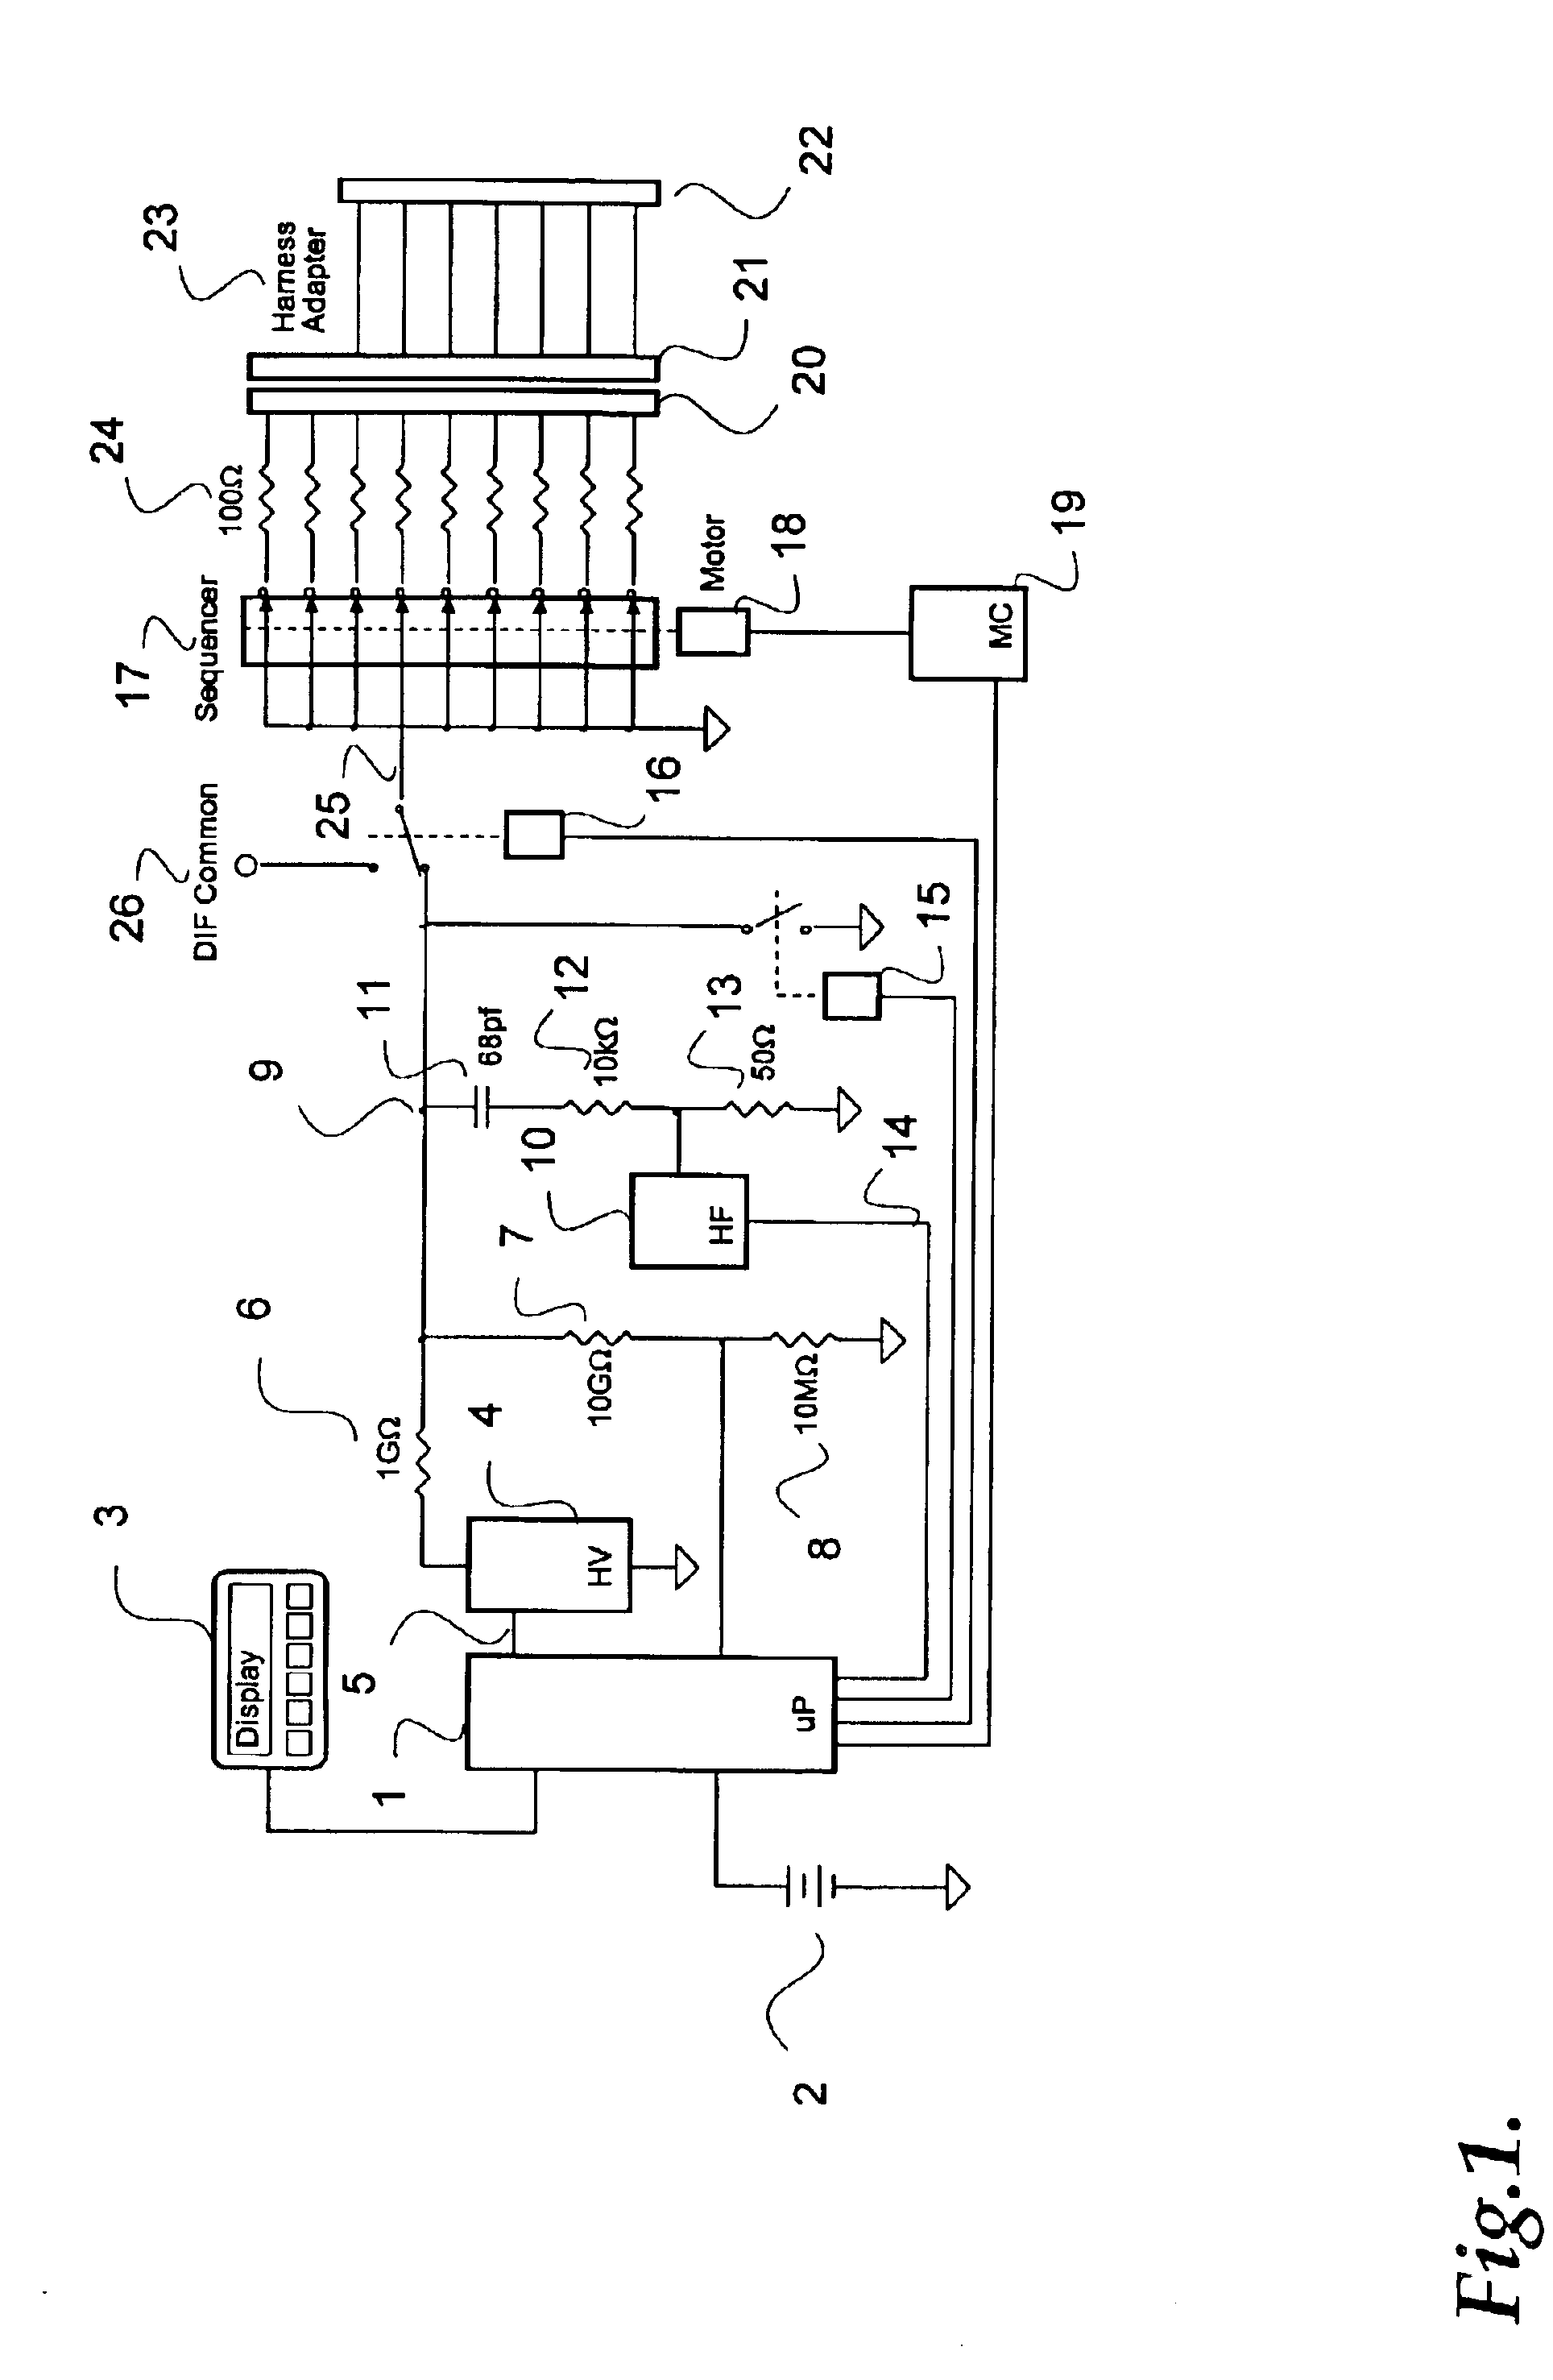 Parallel insulation fault detection system